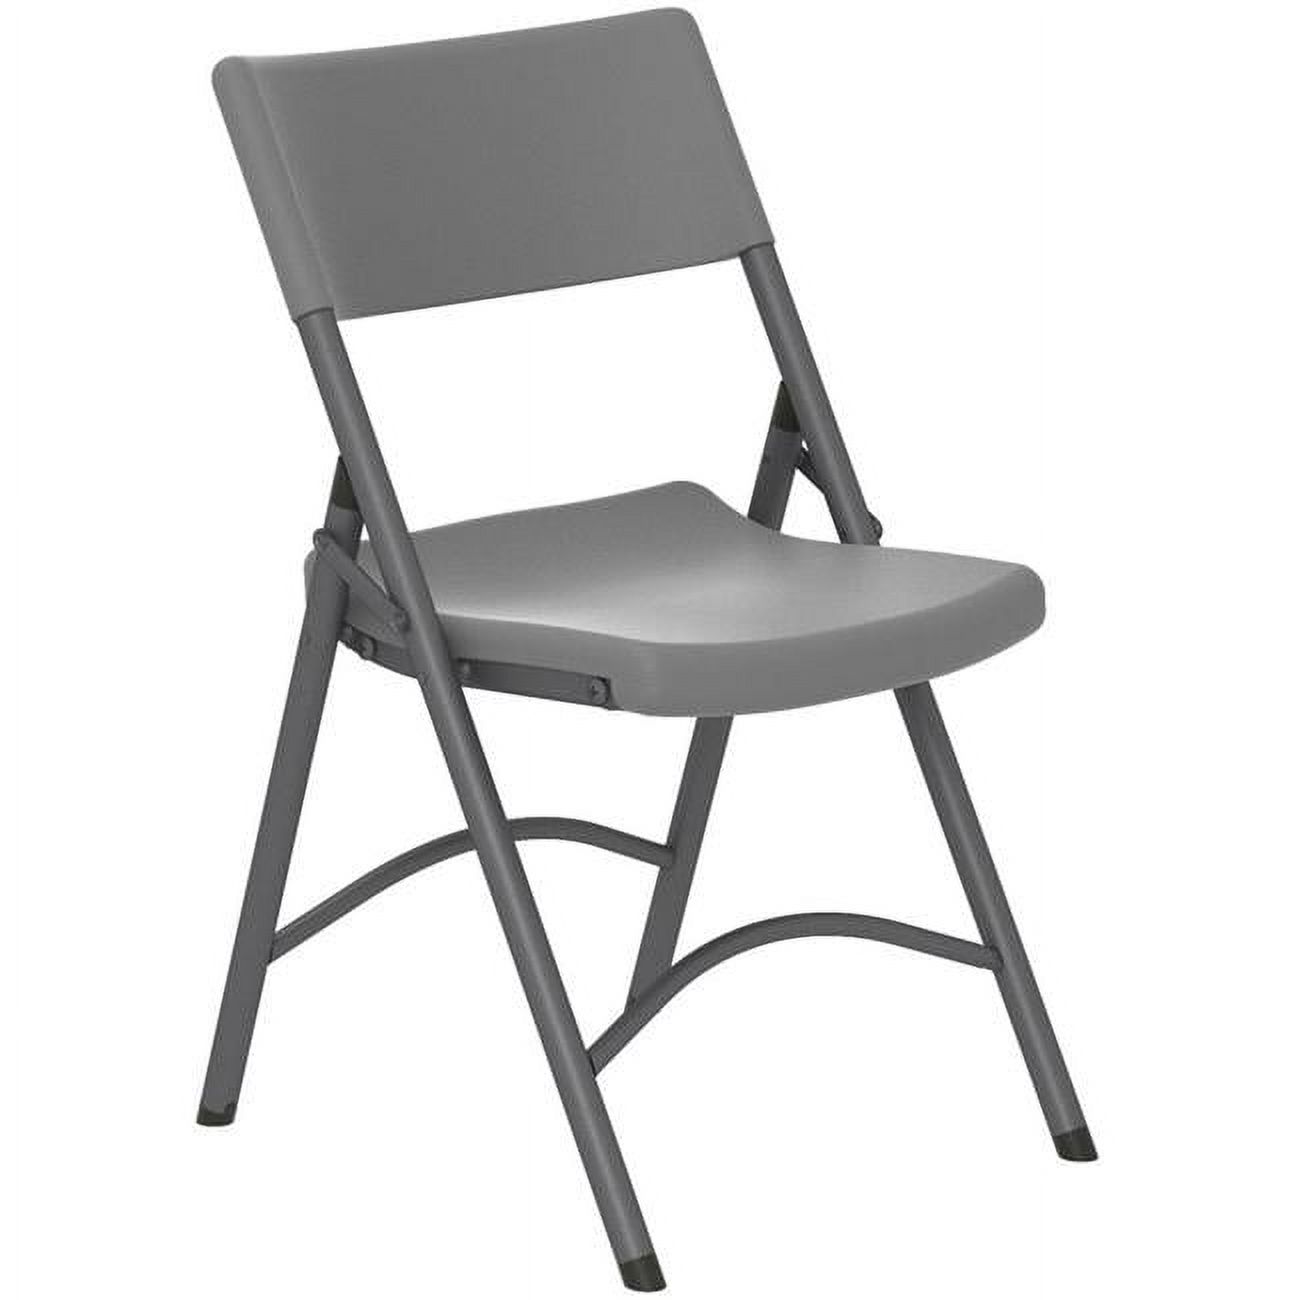 Dorel Industries CSC60410SGY4E Folding Chair, Gray - Pack of 4 - image 1 of 7